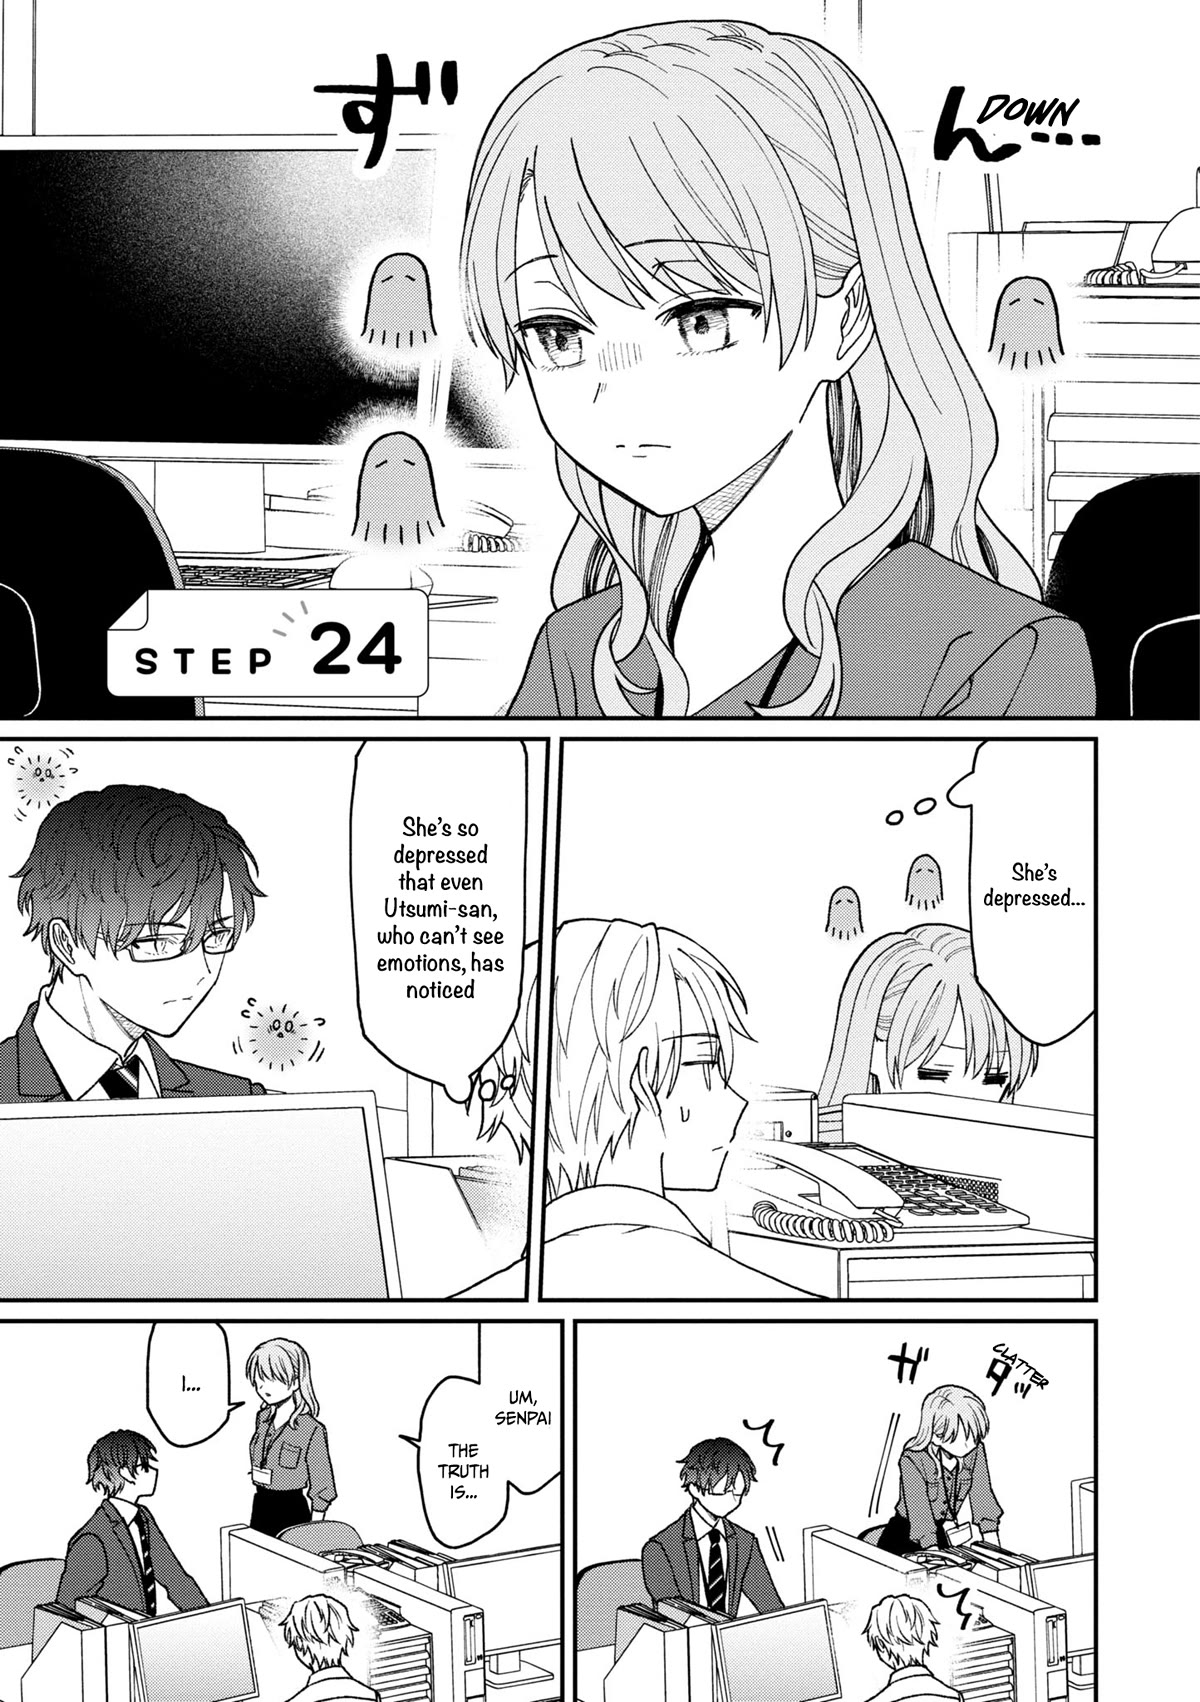 The New-Hire Who Could "Read" Emotions and the Unsociable Senpai - chapter 24 - #2